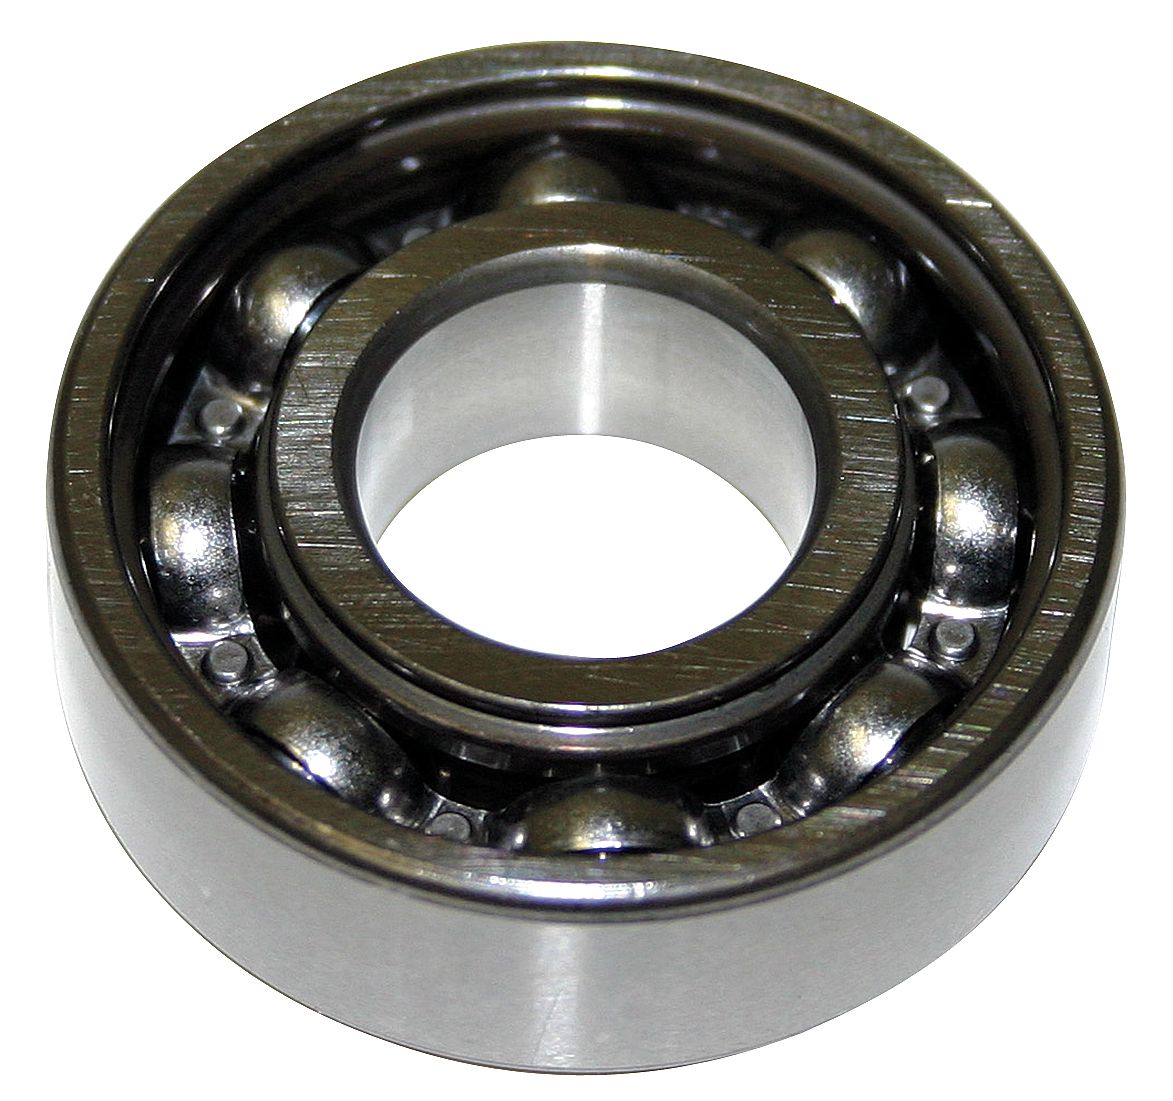 2550 lbs Dynamic Load Capacity No Snap Ring Timken 9105KDD Ball Bearing 12 mm Width Max RPM 1290 lbs Static Load Capacity 47 mm OD Double Shielded 25 mm ID Metric